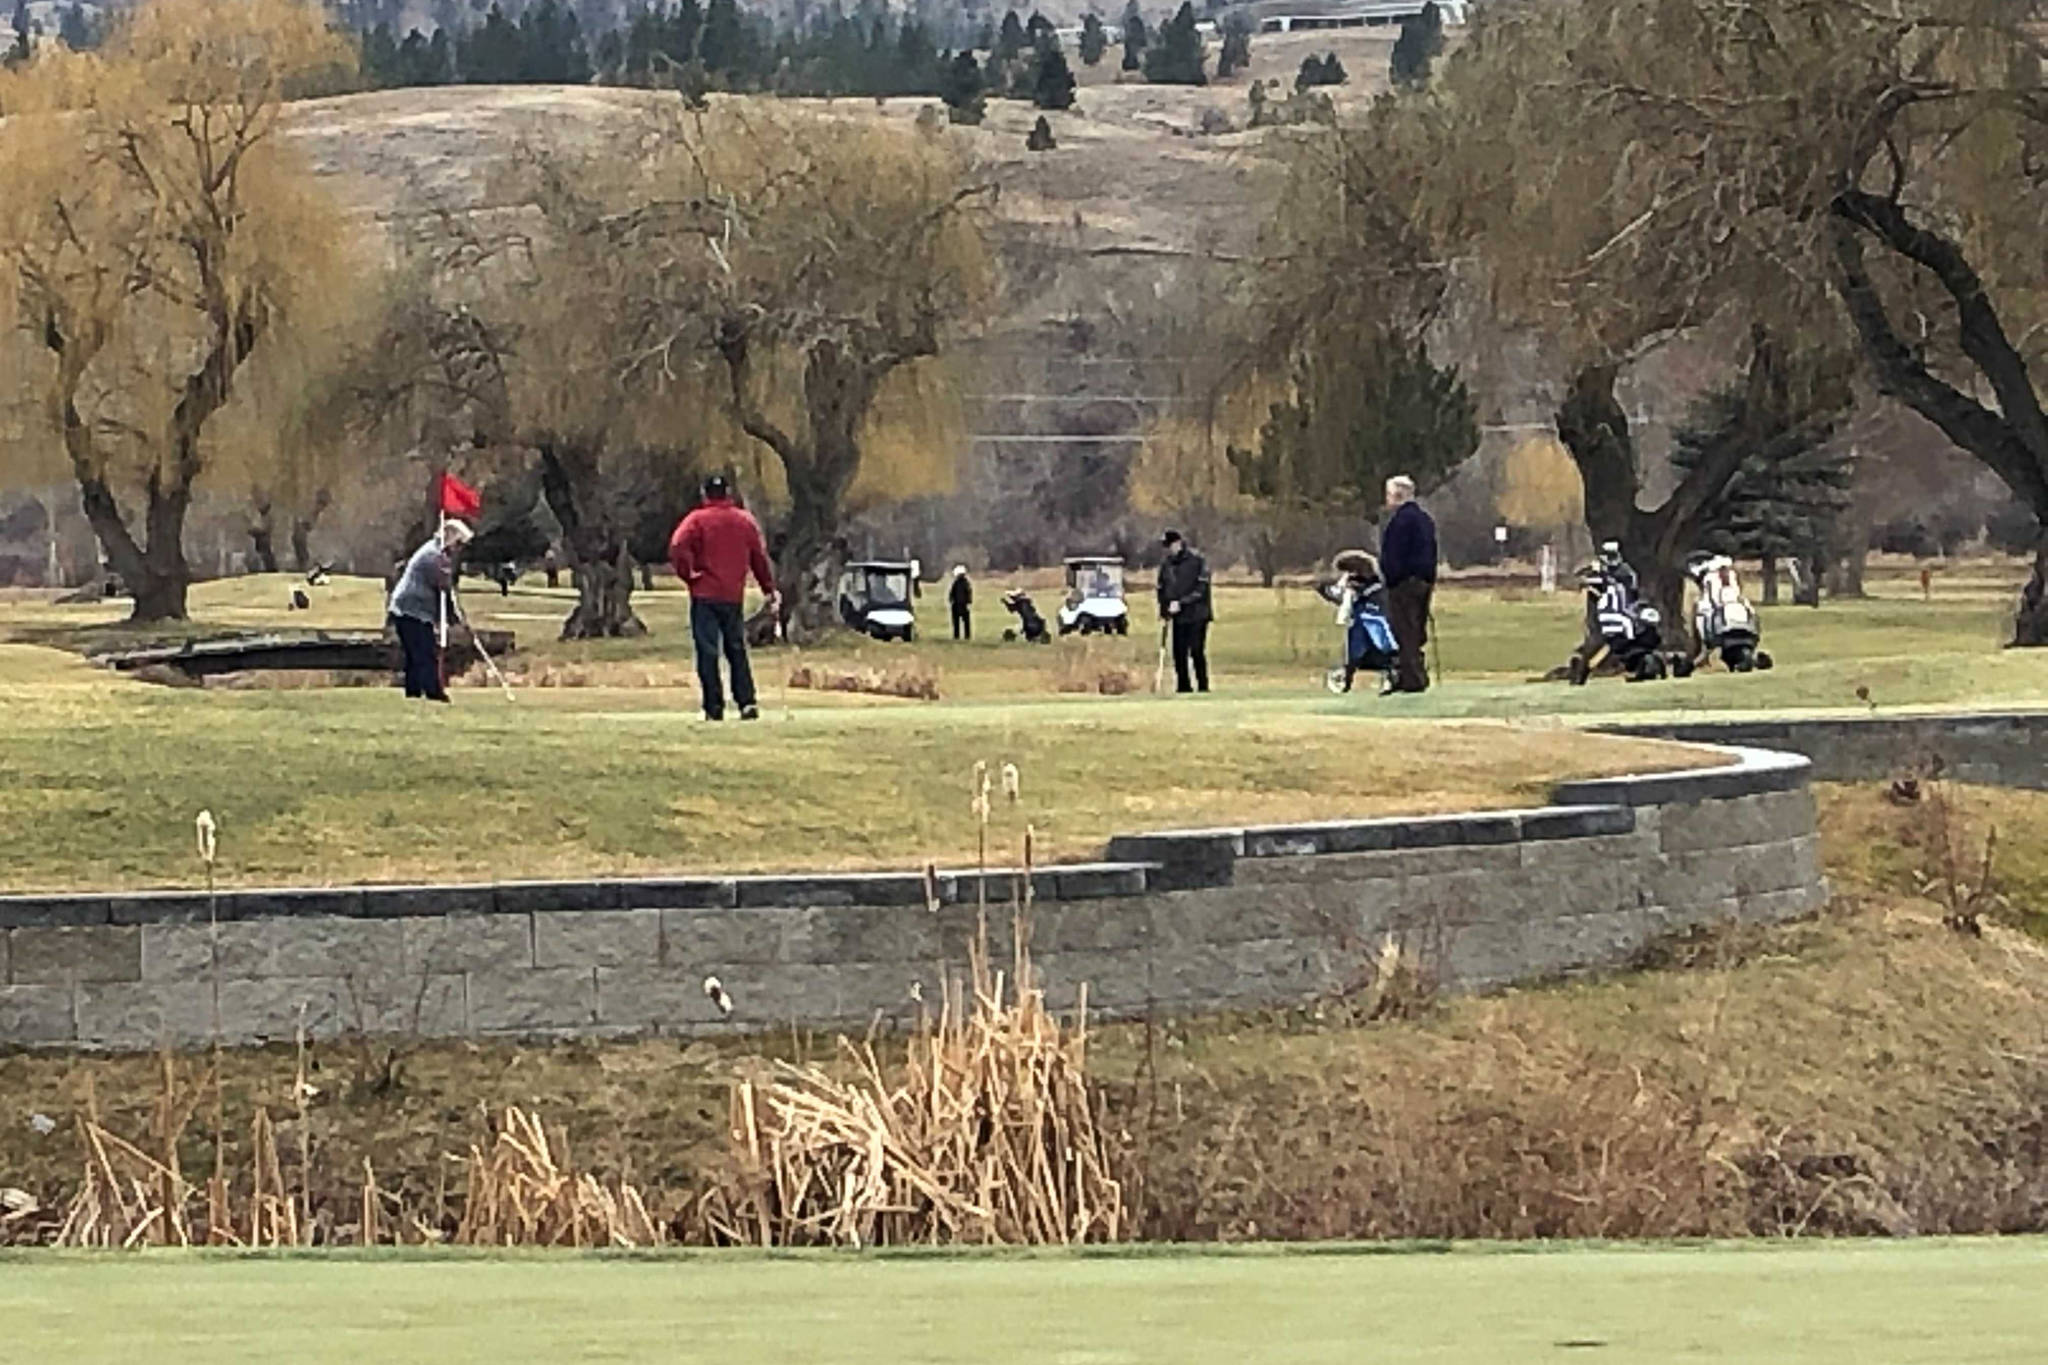 Penticton Golf and Country Club was in full swing on opening day on March 2. (Monique Tamminga - Western News)